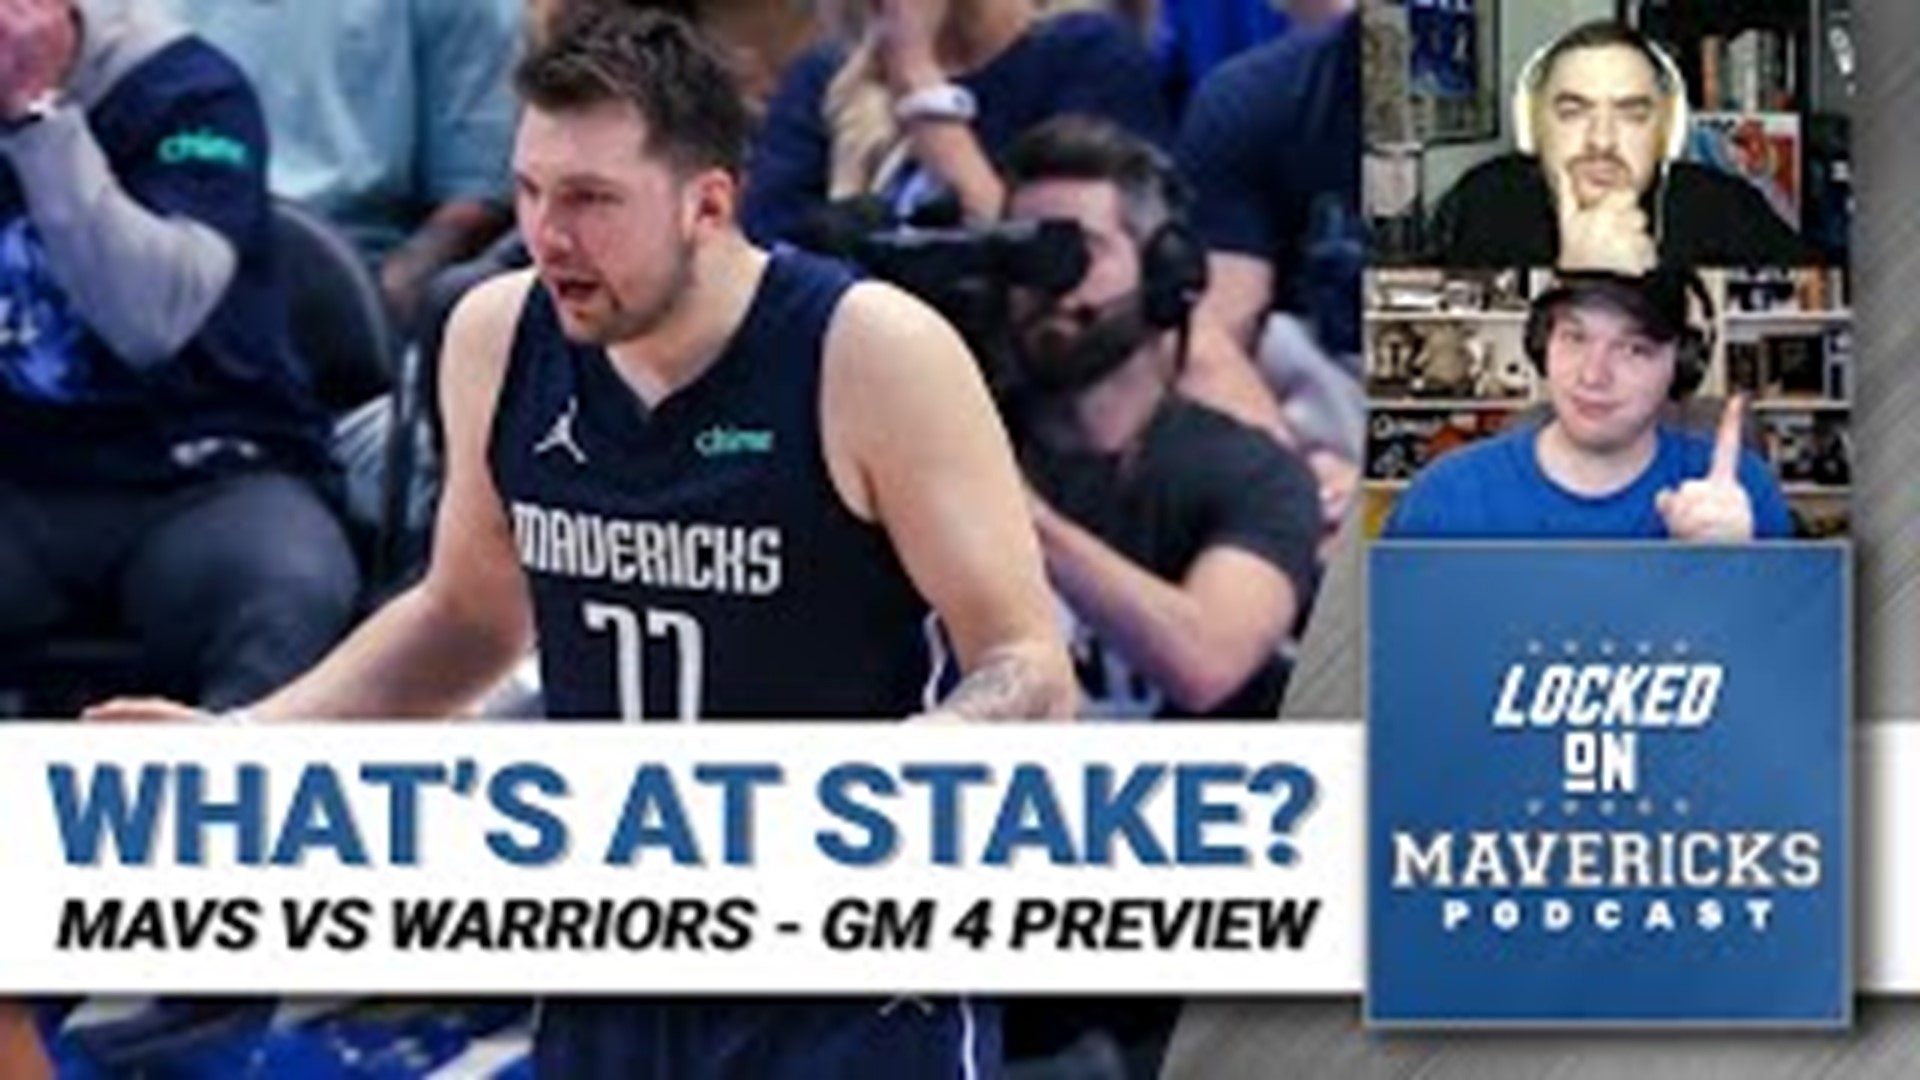 Nick Angstadt & Isaac Harris discuss 5 big questions before Game 4 against the Warriors.